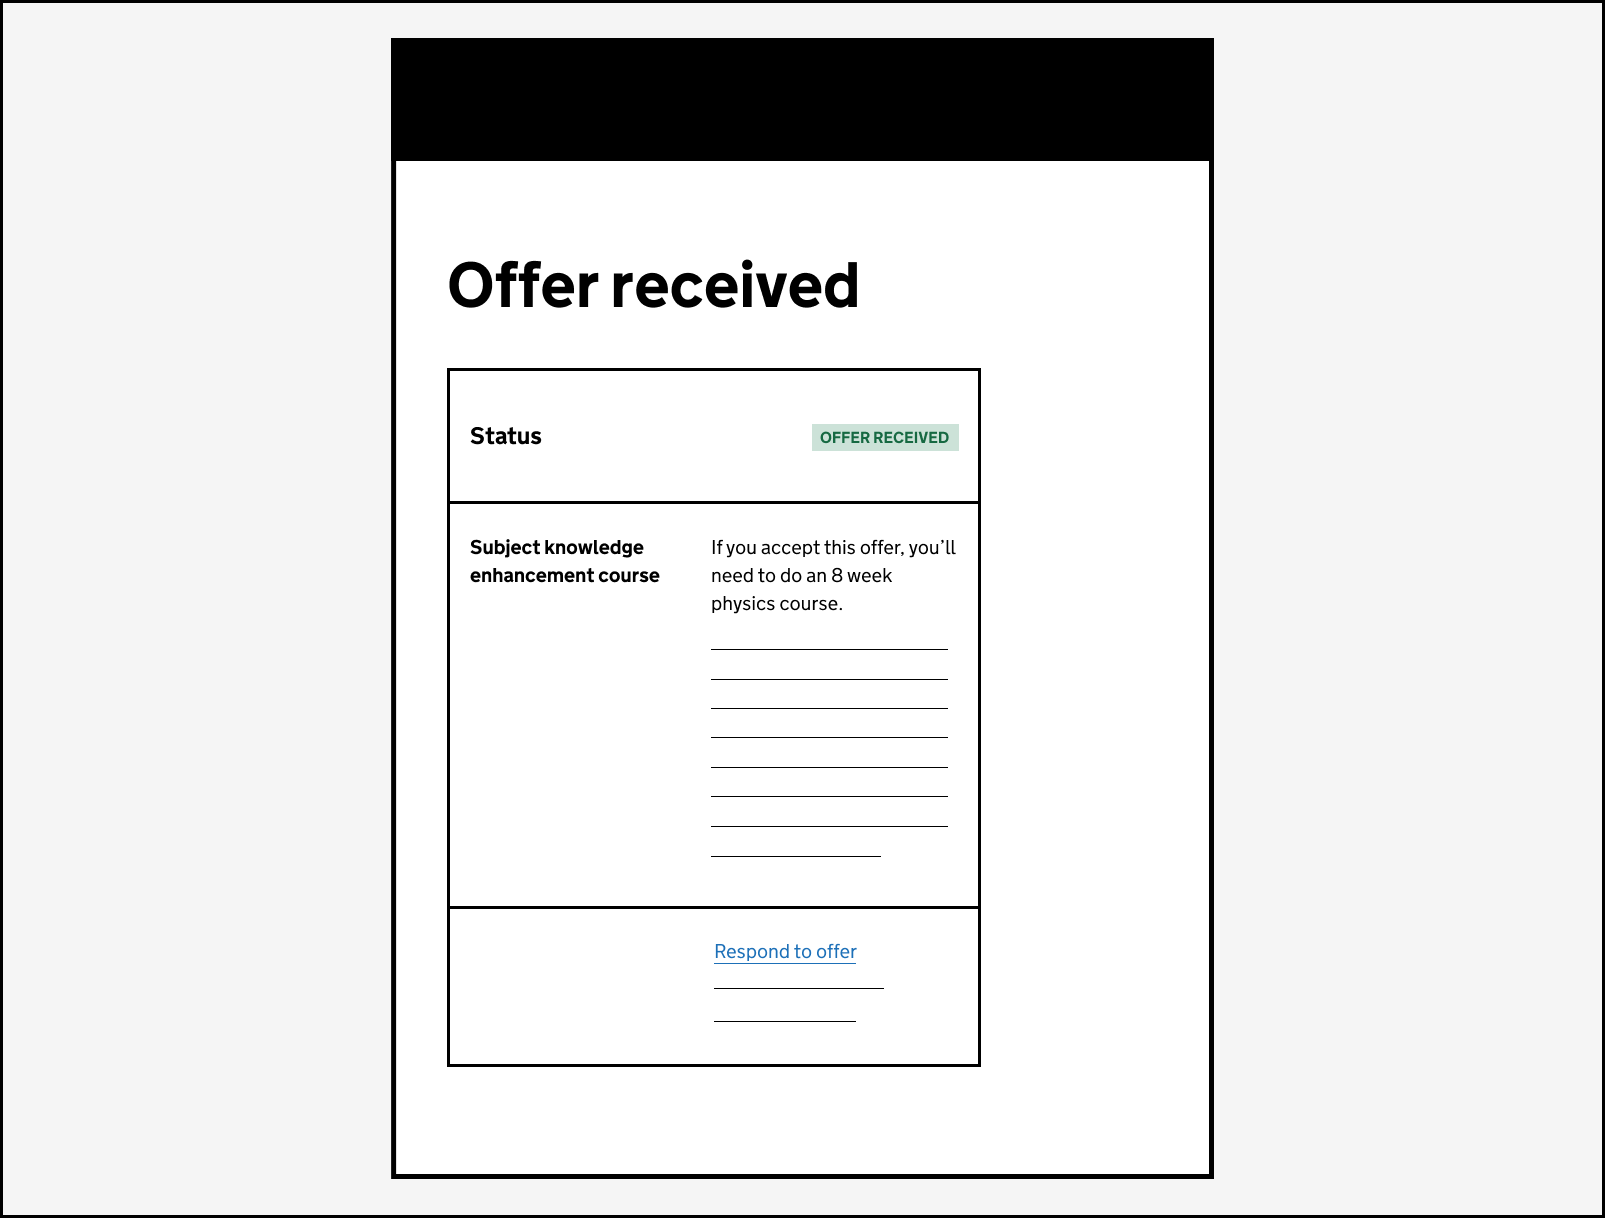 Illustration with the text 'Offer received' and inforation about doing an 8 week subject knowledge enhancement course in physics